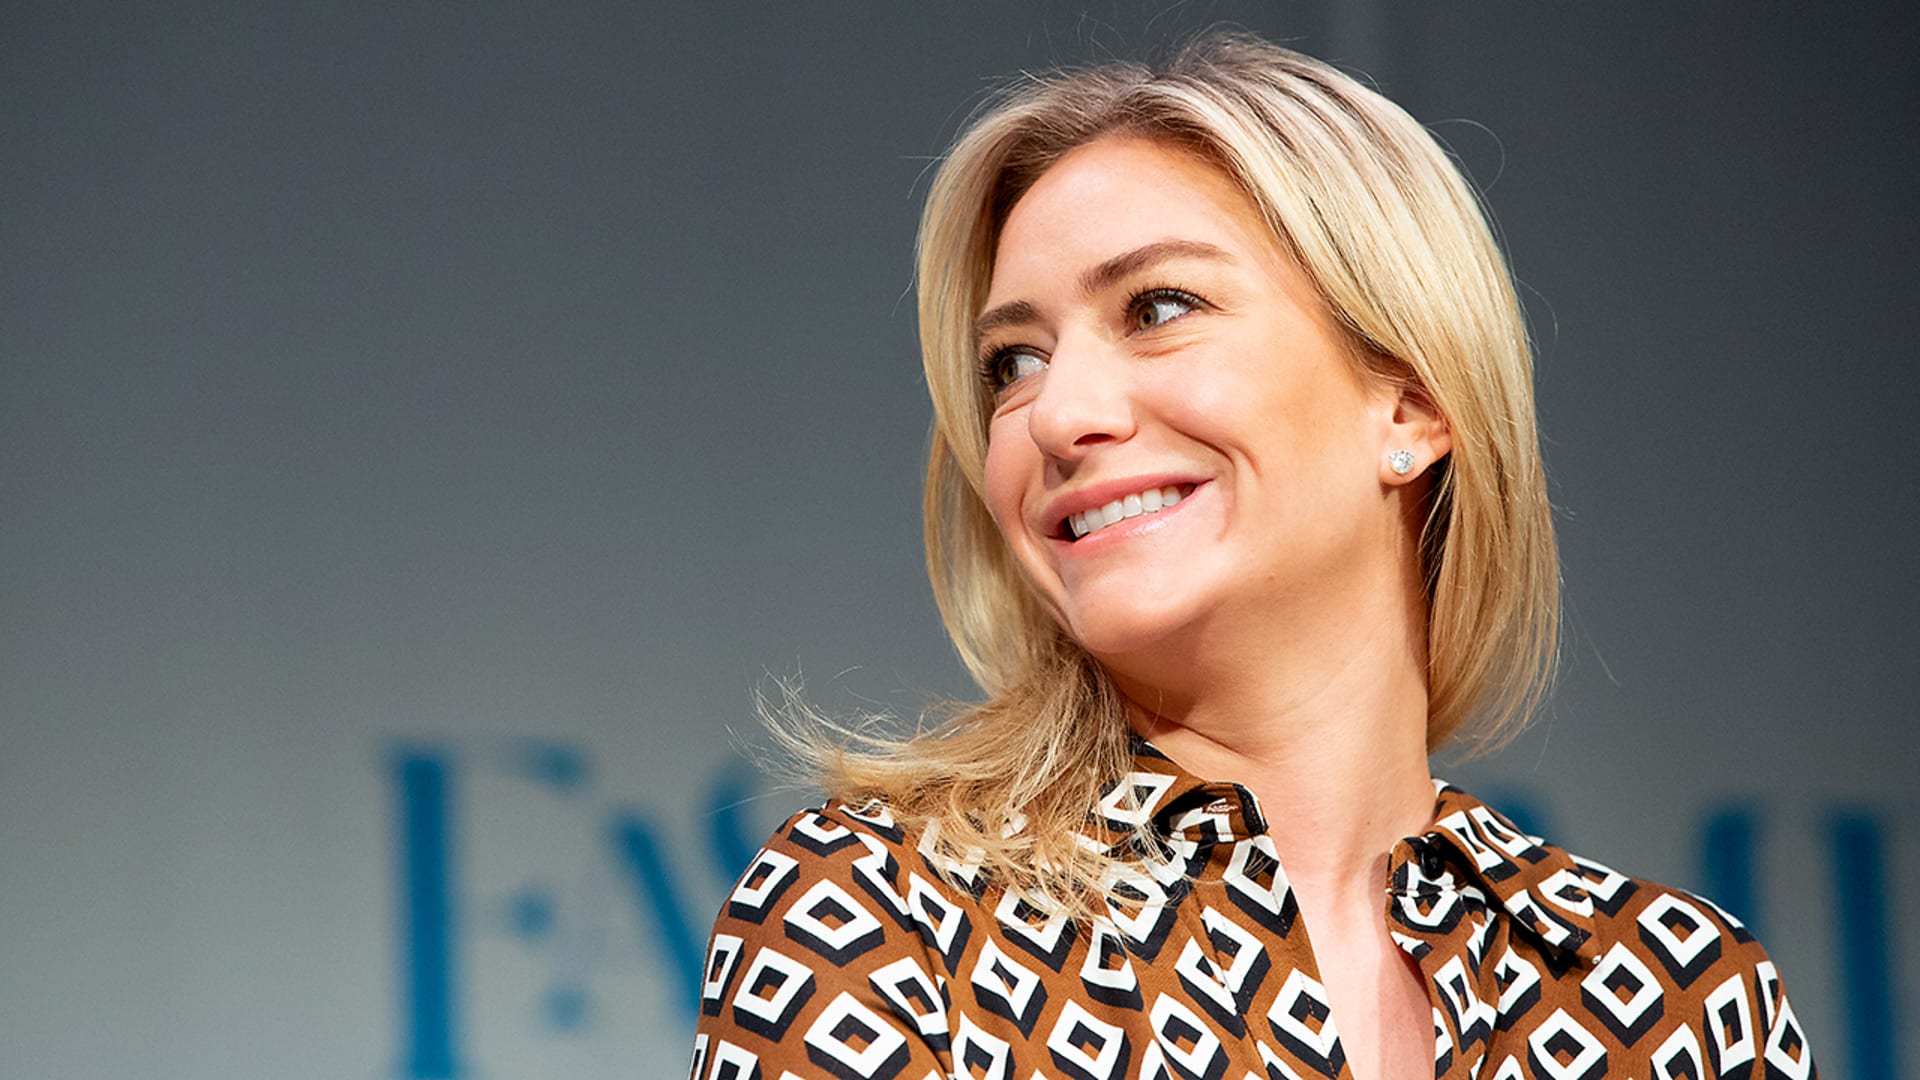 Pregnancy is making Bumble CEO Whitney Wolfe Herd rethink parental work policies